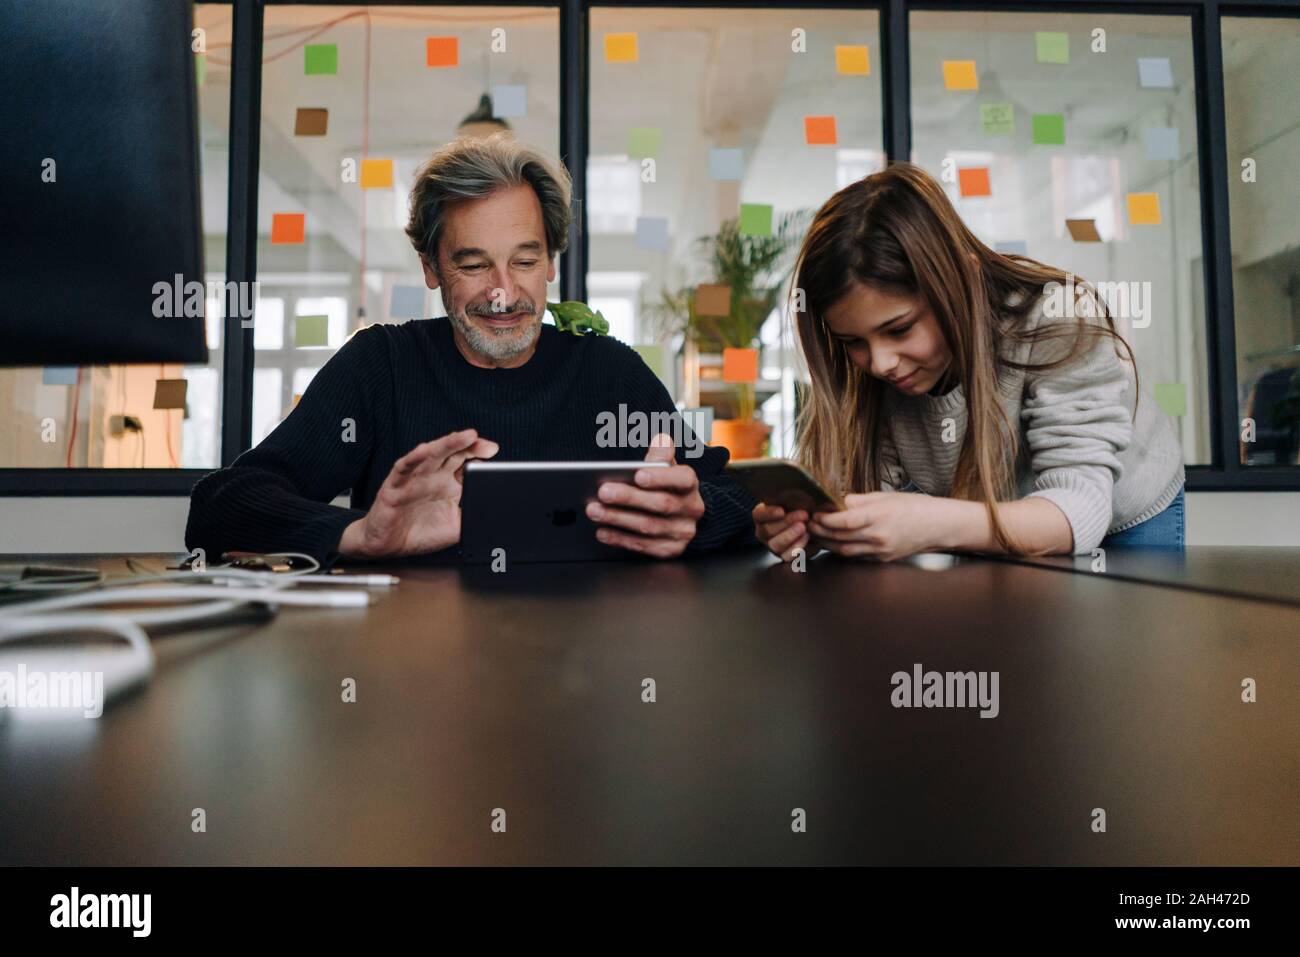 Casual senior buisinessman and girl using tablet and smartphone in office Stock Photo